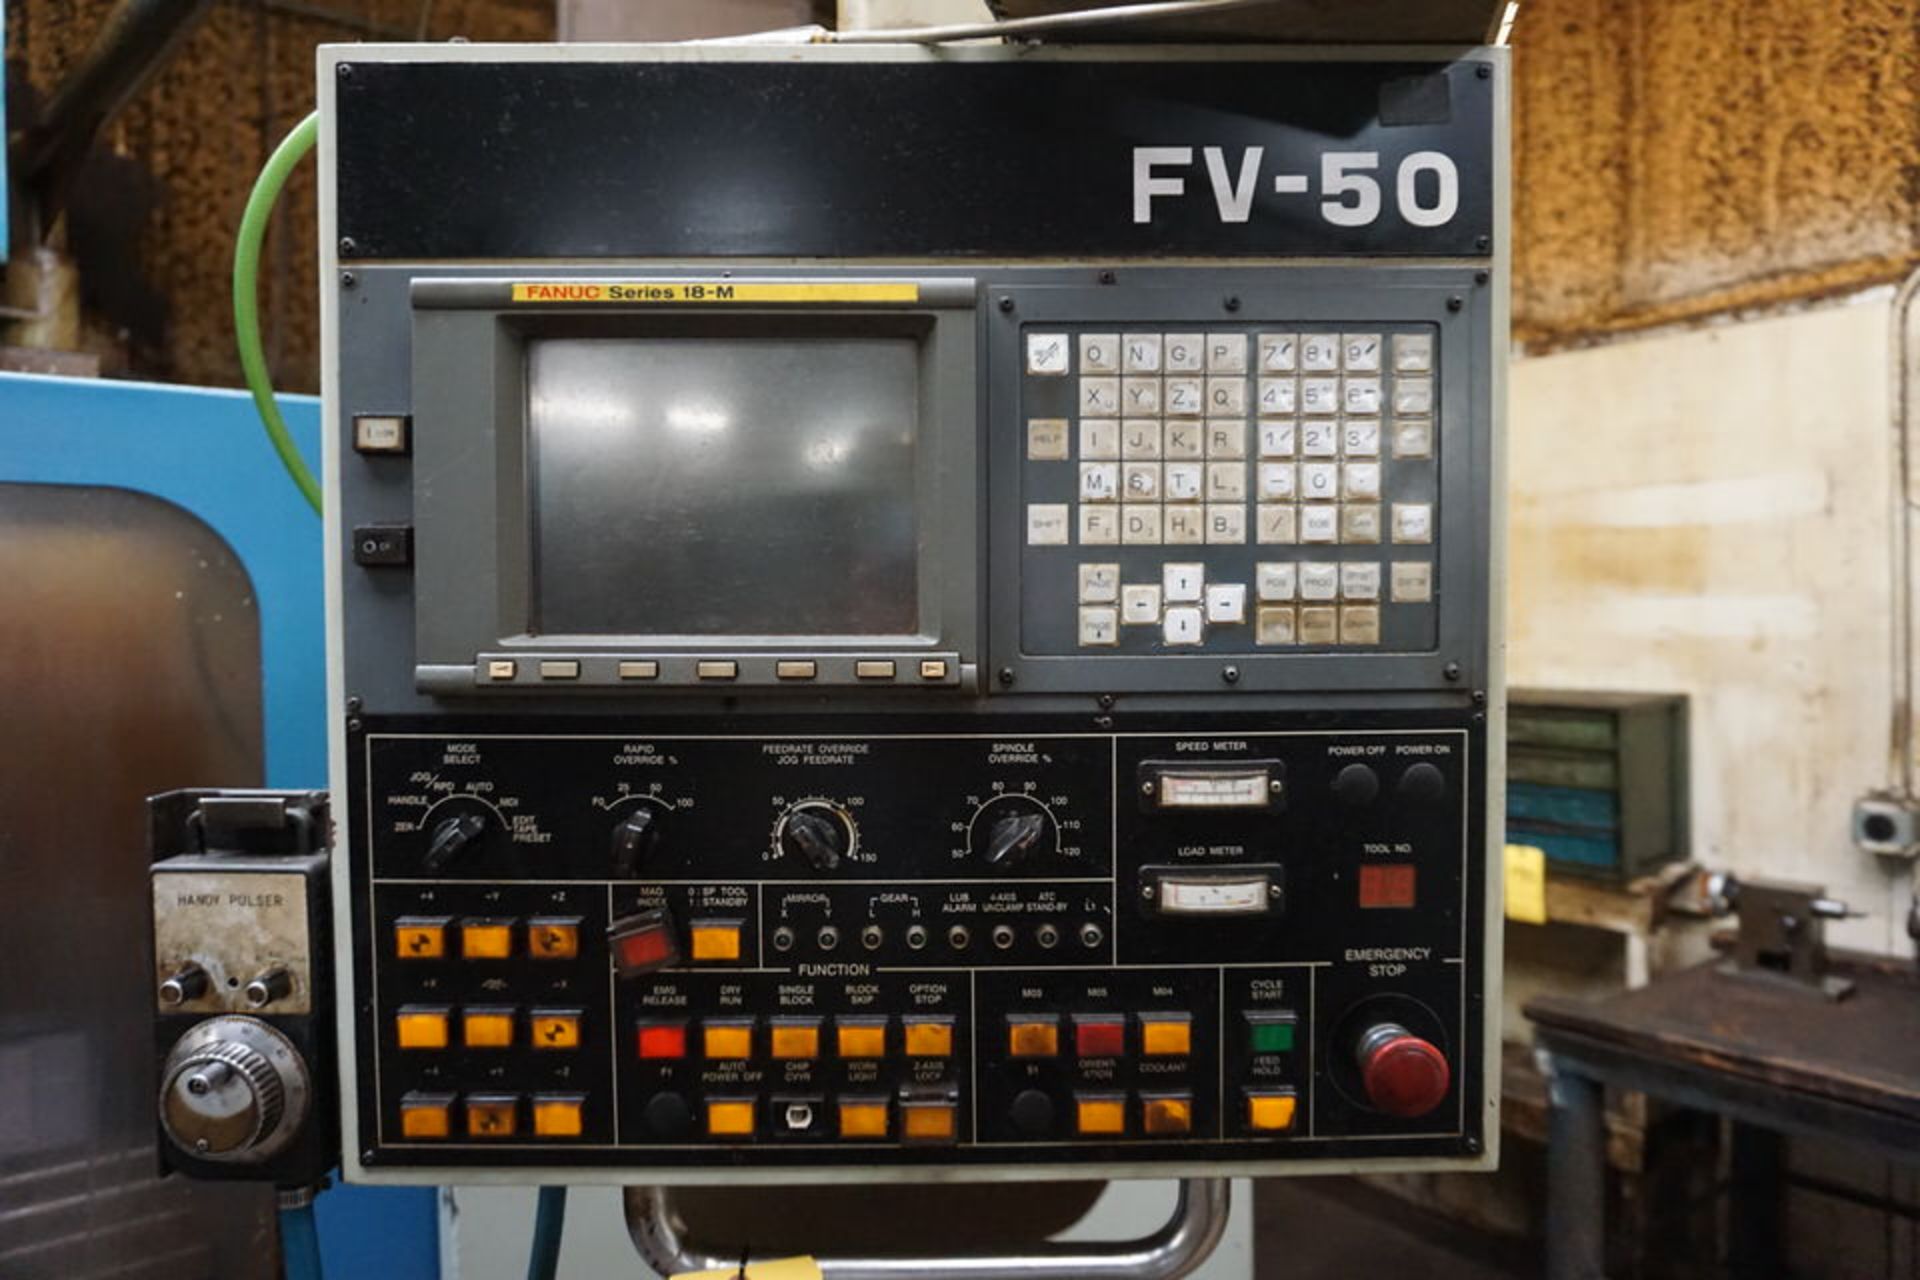 FEMTEC FV-50 CNC MILL, DOM 1998, FANUC SERIES 18-M CONTROL, (24) TOOL CHANGERS, 22" X 51" TABLE, CAT - Image 2 of 8